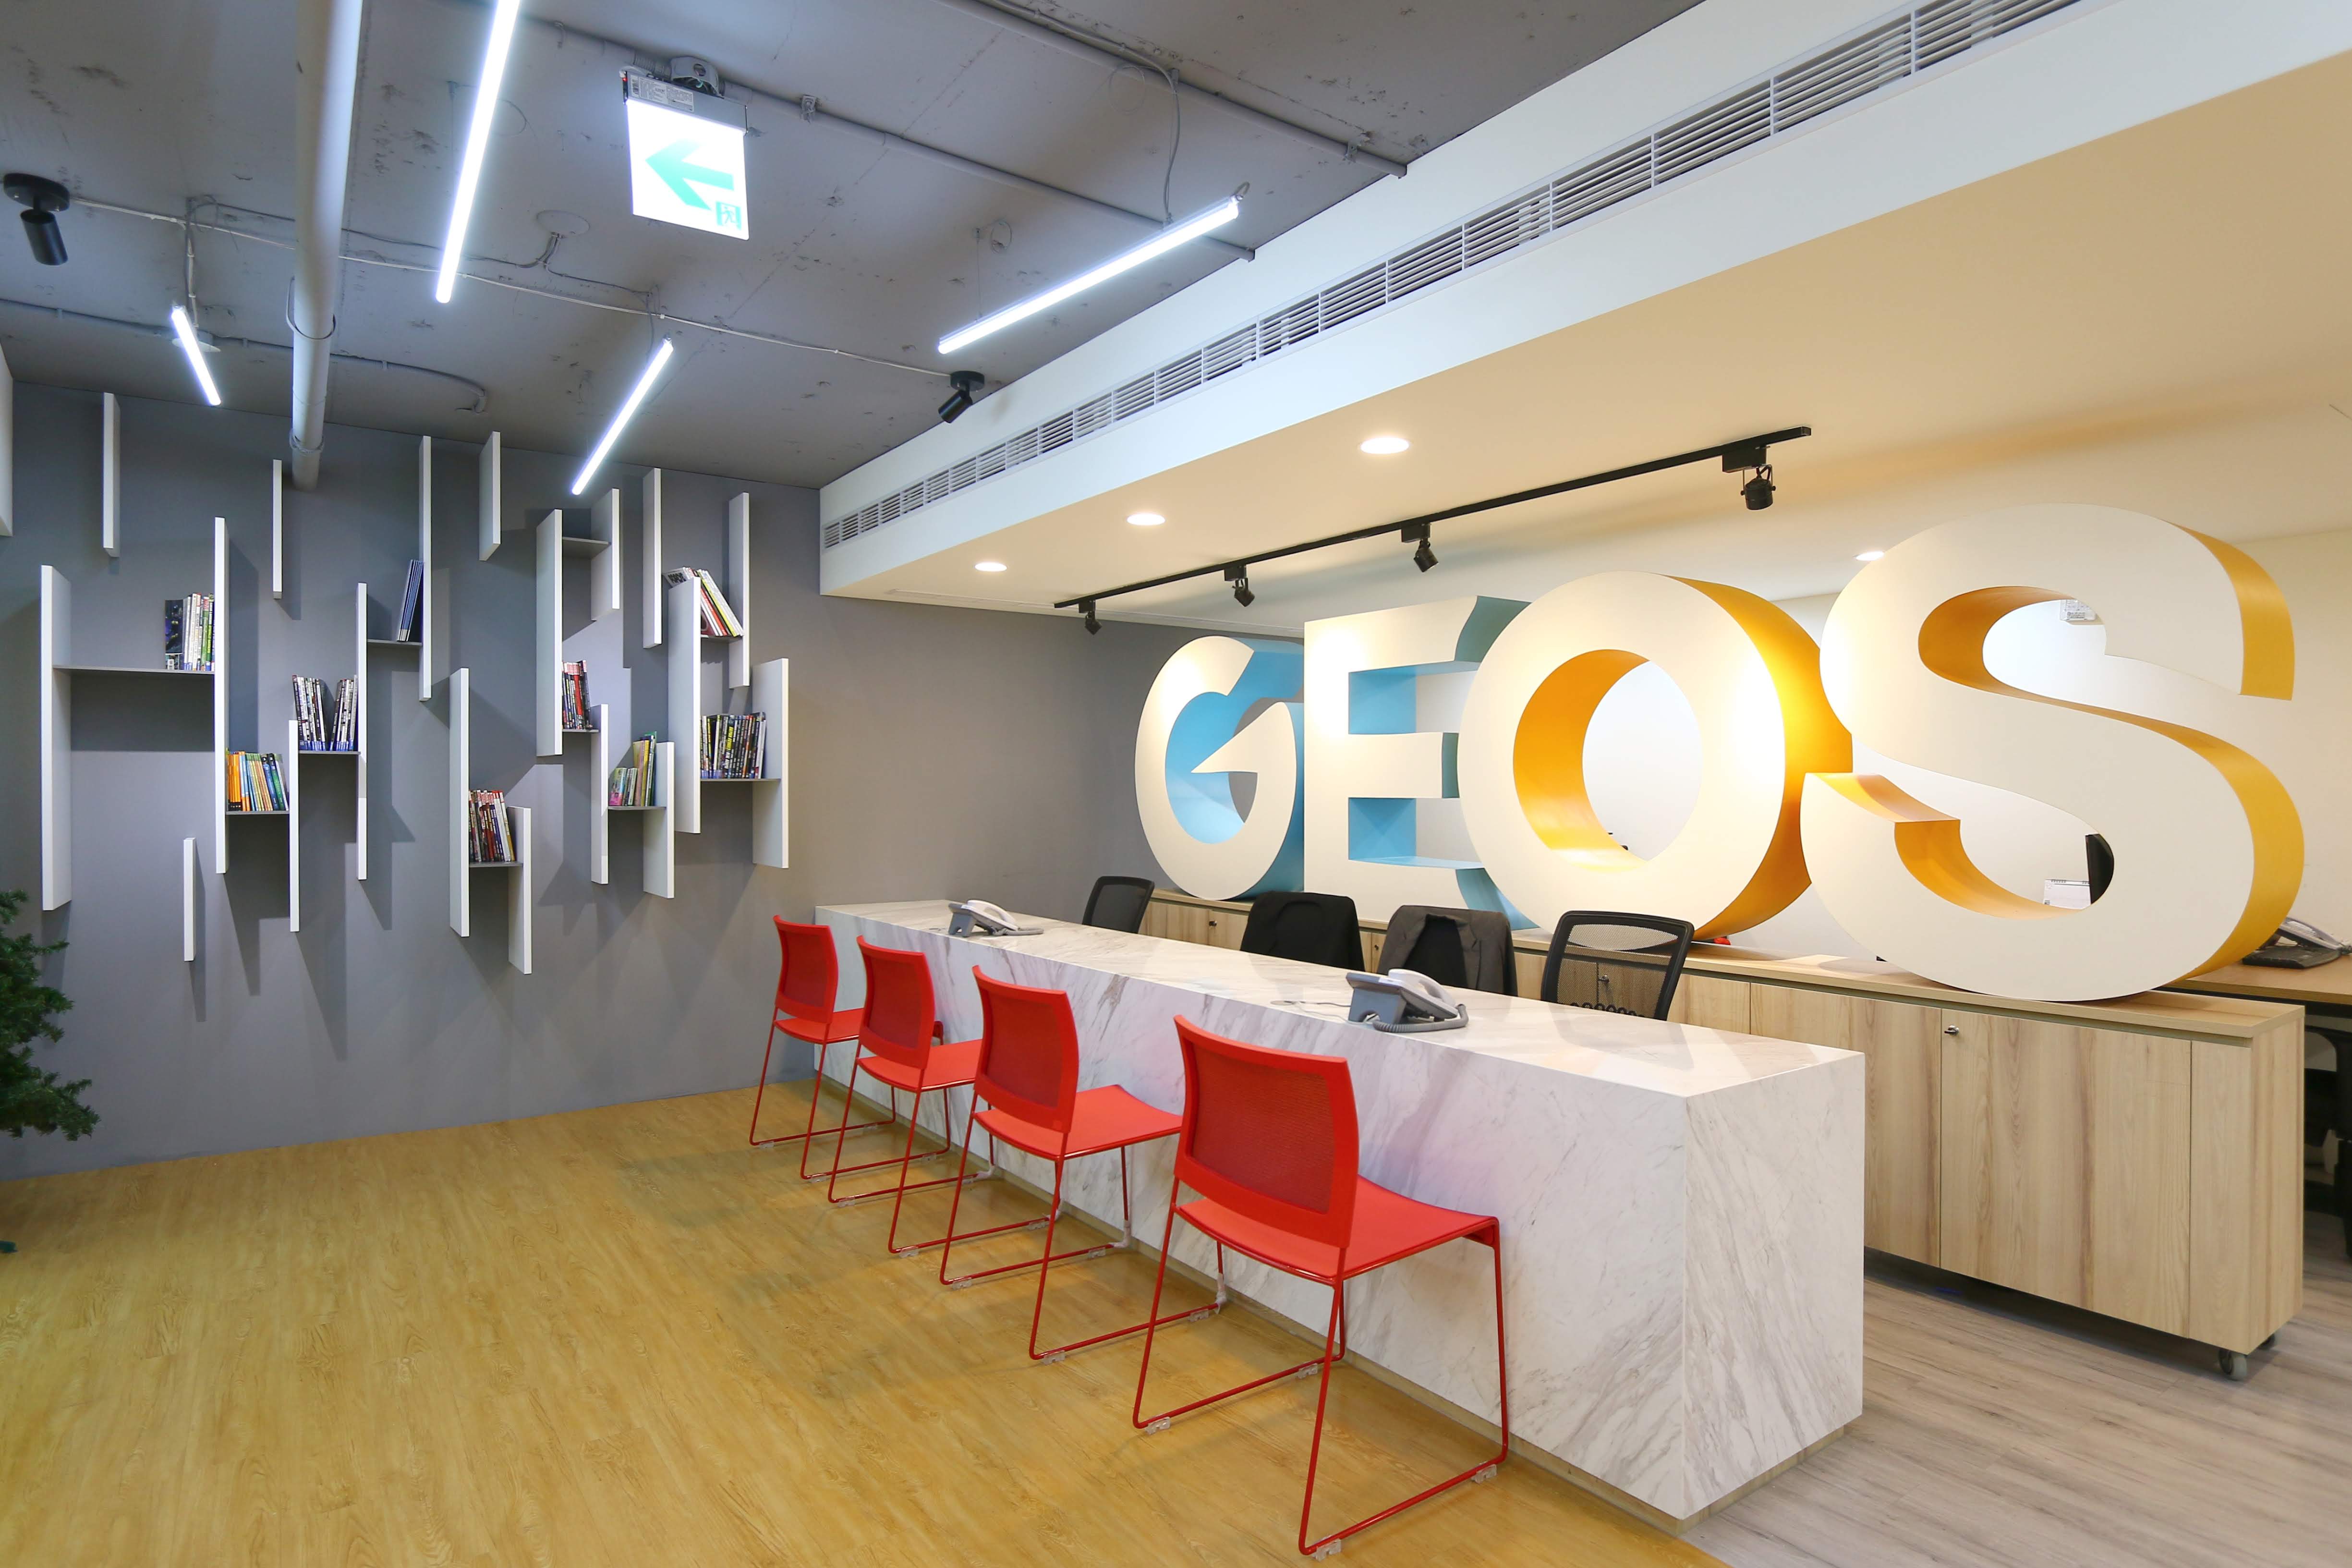 Teaching English and Living in Taiwan Jobs Available 教學工作, GEOS Language Academy, Taiwan GEOS welcomes you! image